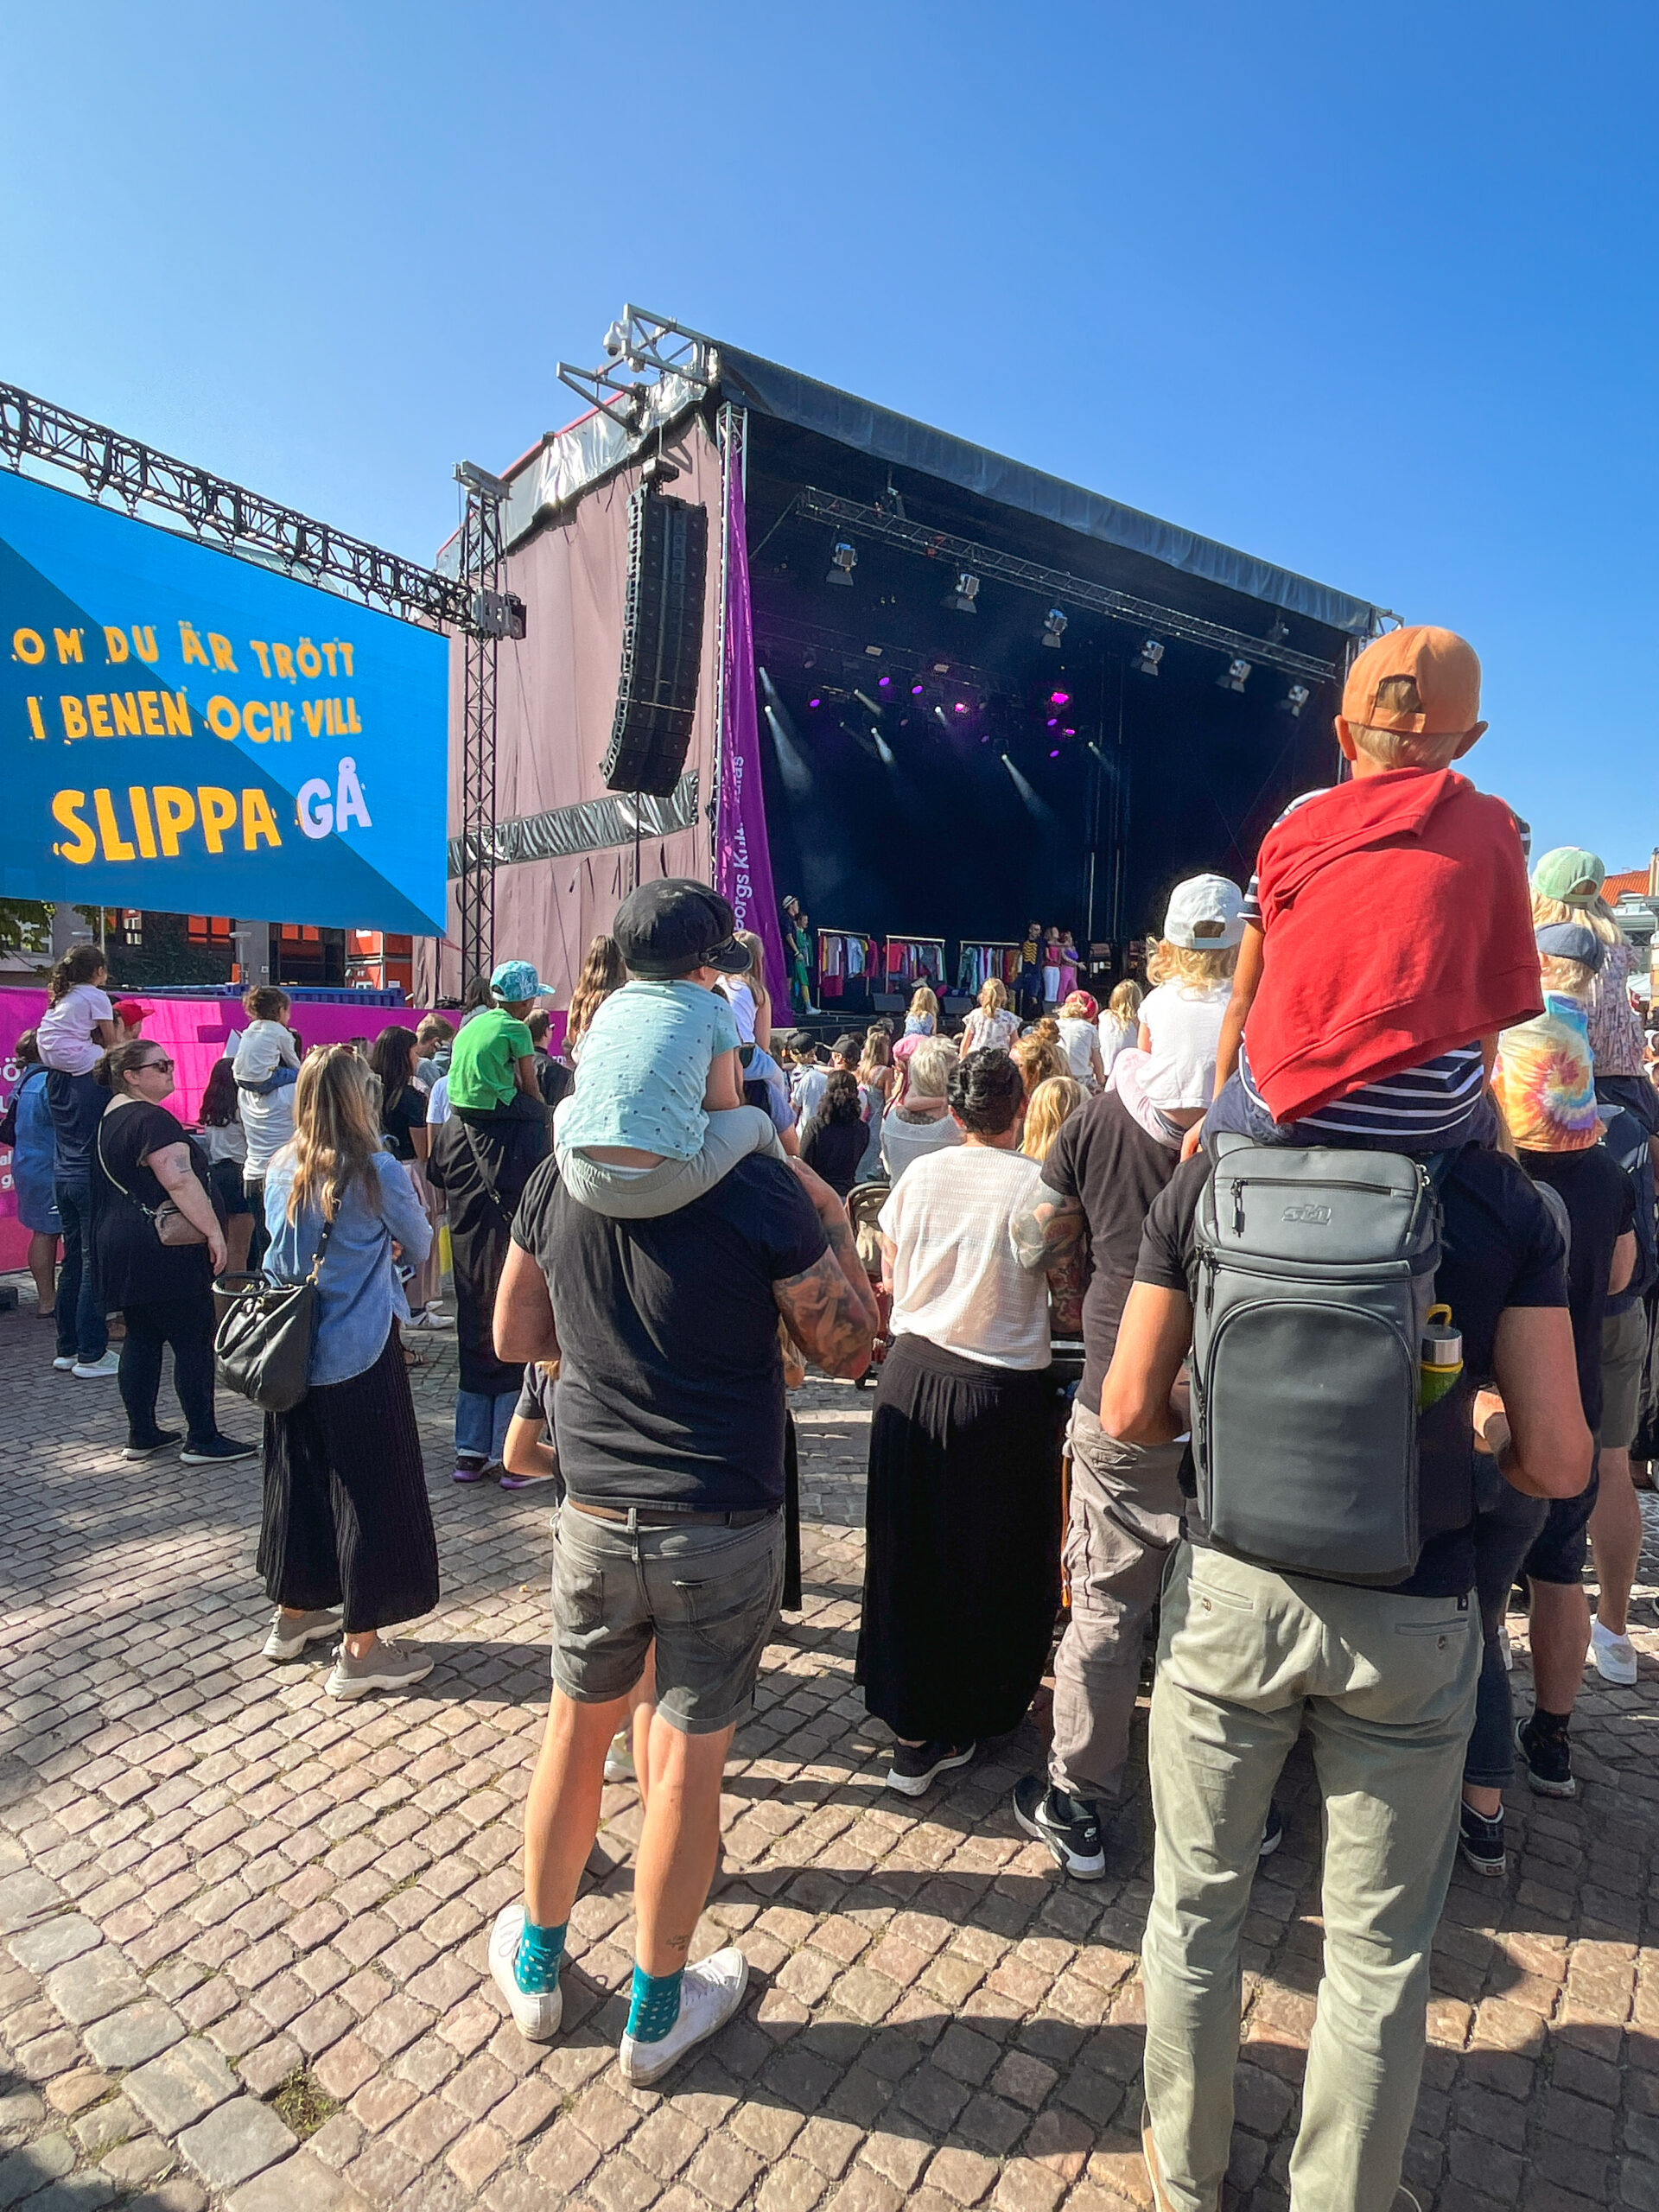 Kokobäng performs on a large stage. The camera's gaze is on children sitting on adults' shoulders with their backs to the camera. On the left in the picture you can see a large screen with the text "om du är trött i benen och vill slippa gå" (eng: "if you are tired in the legs and don't want to walk") which is the text from the song that Kokobäng sings. It is a clear day with blue skies.